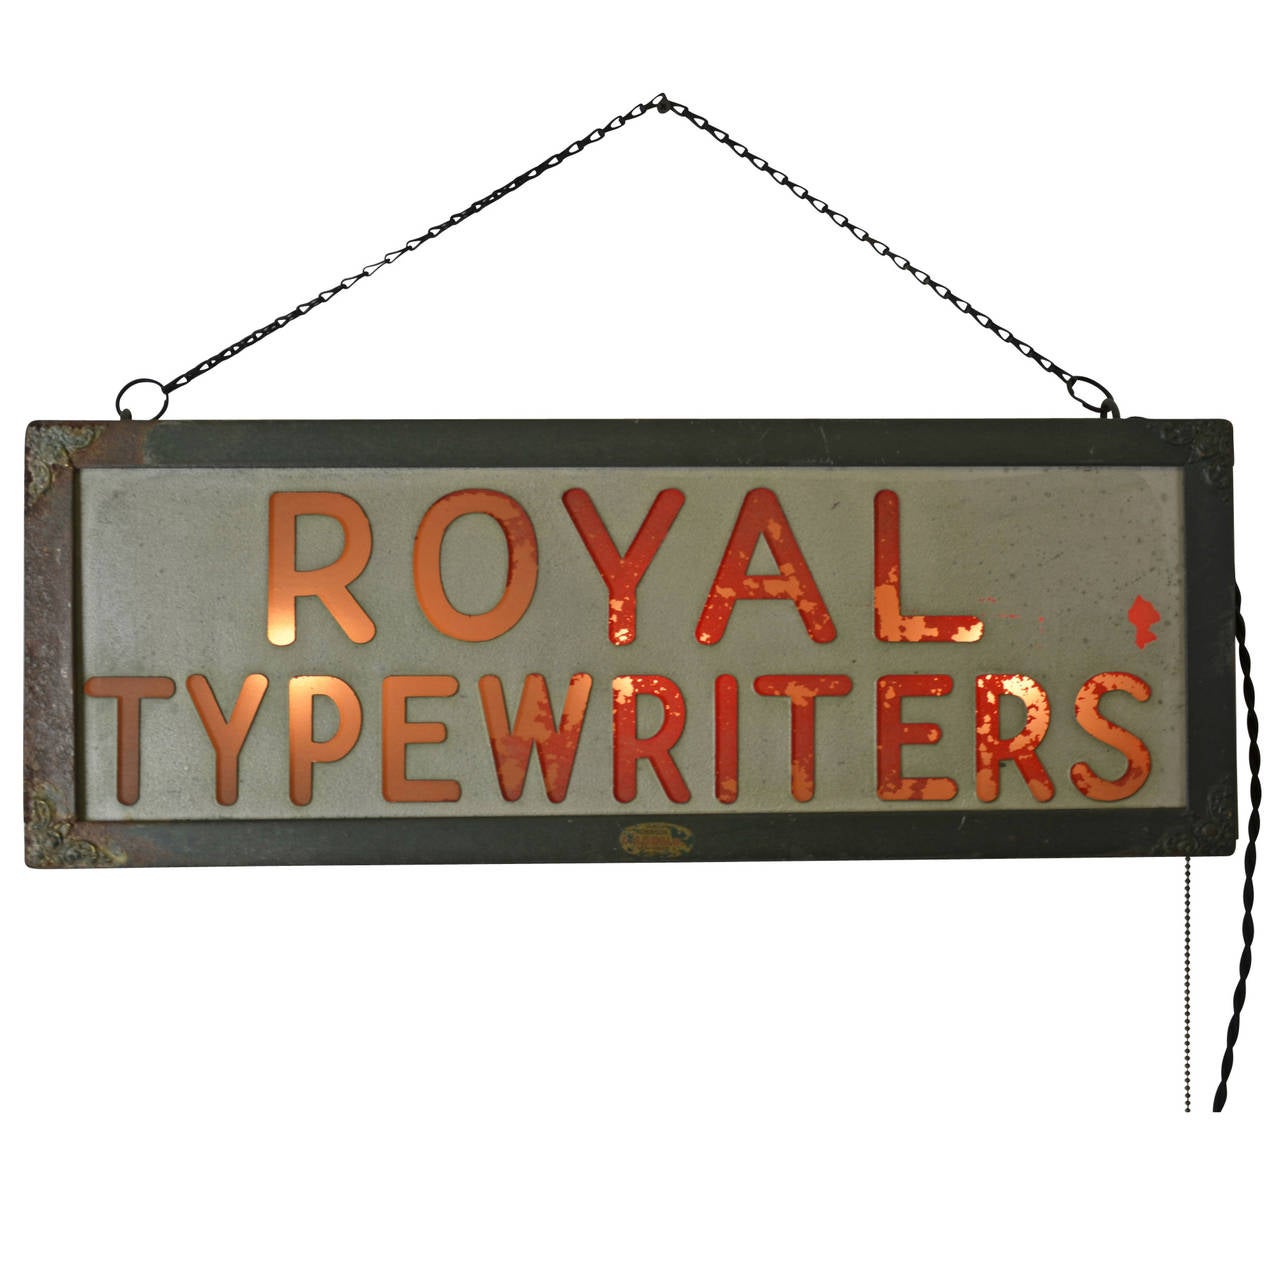 Classic and wonderfully weathered, this very early royal typewriters illuminated advertisement sign would once have hung in the window of a trusted Royal retailer. Produced by Robinson & Company, this "Colorglow" sign features a steel